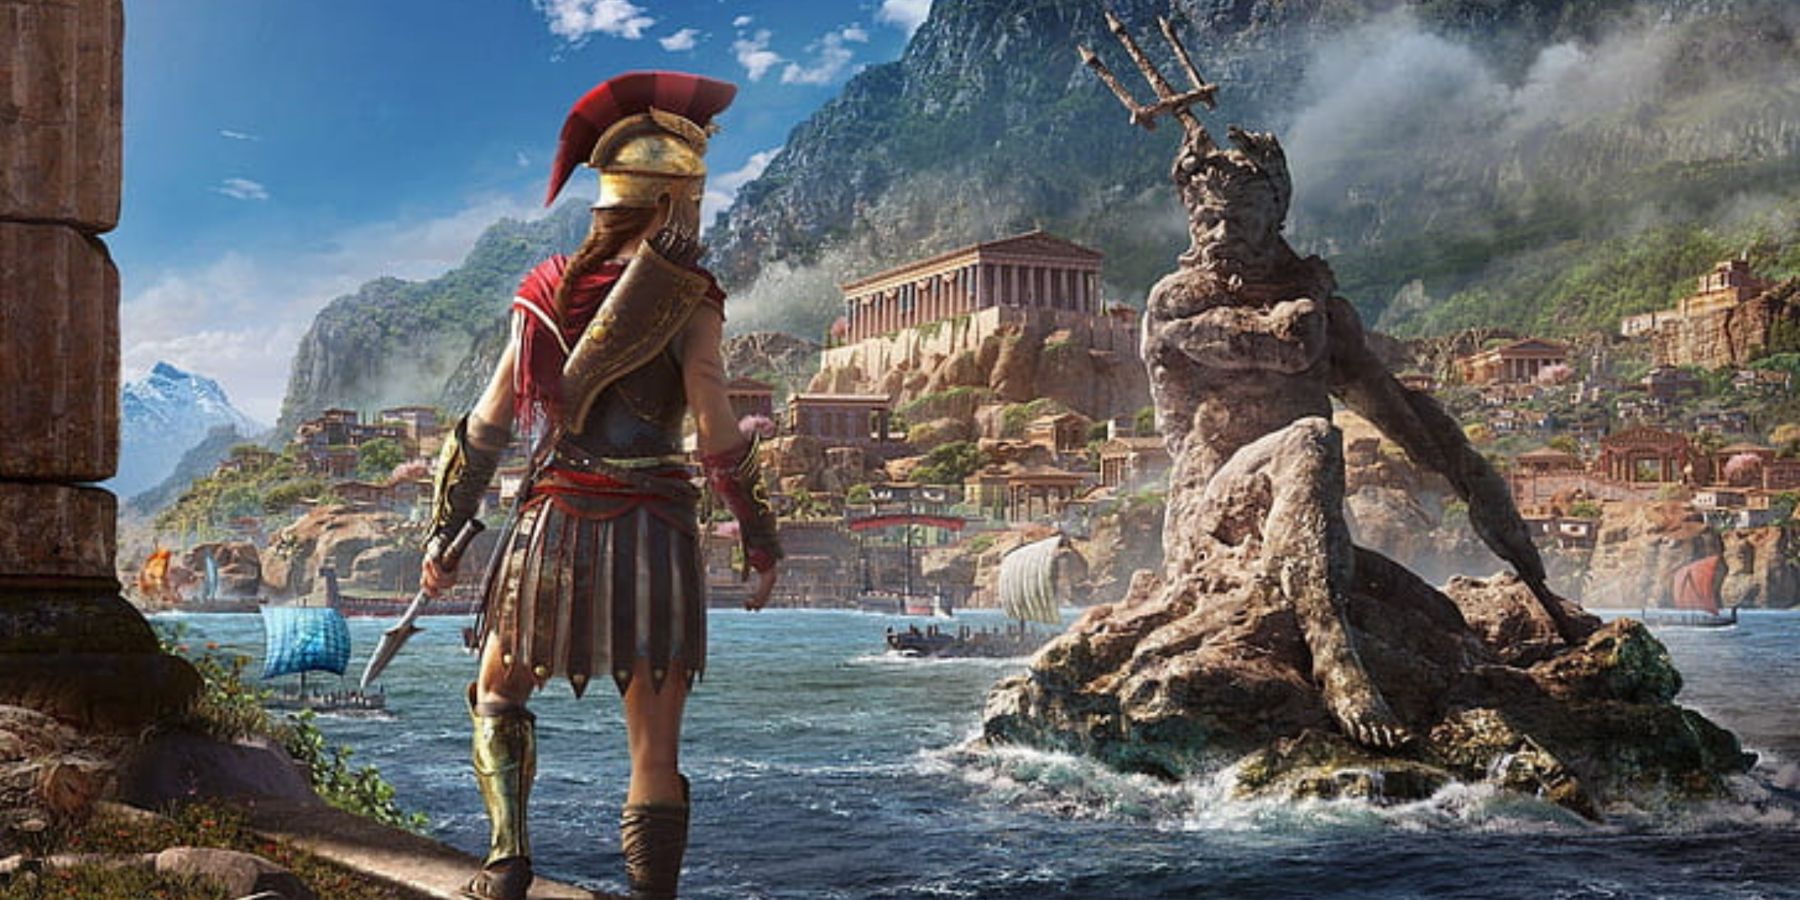 Assassin's Creed Odyssey Statue In The River